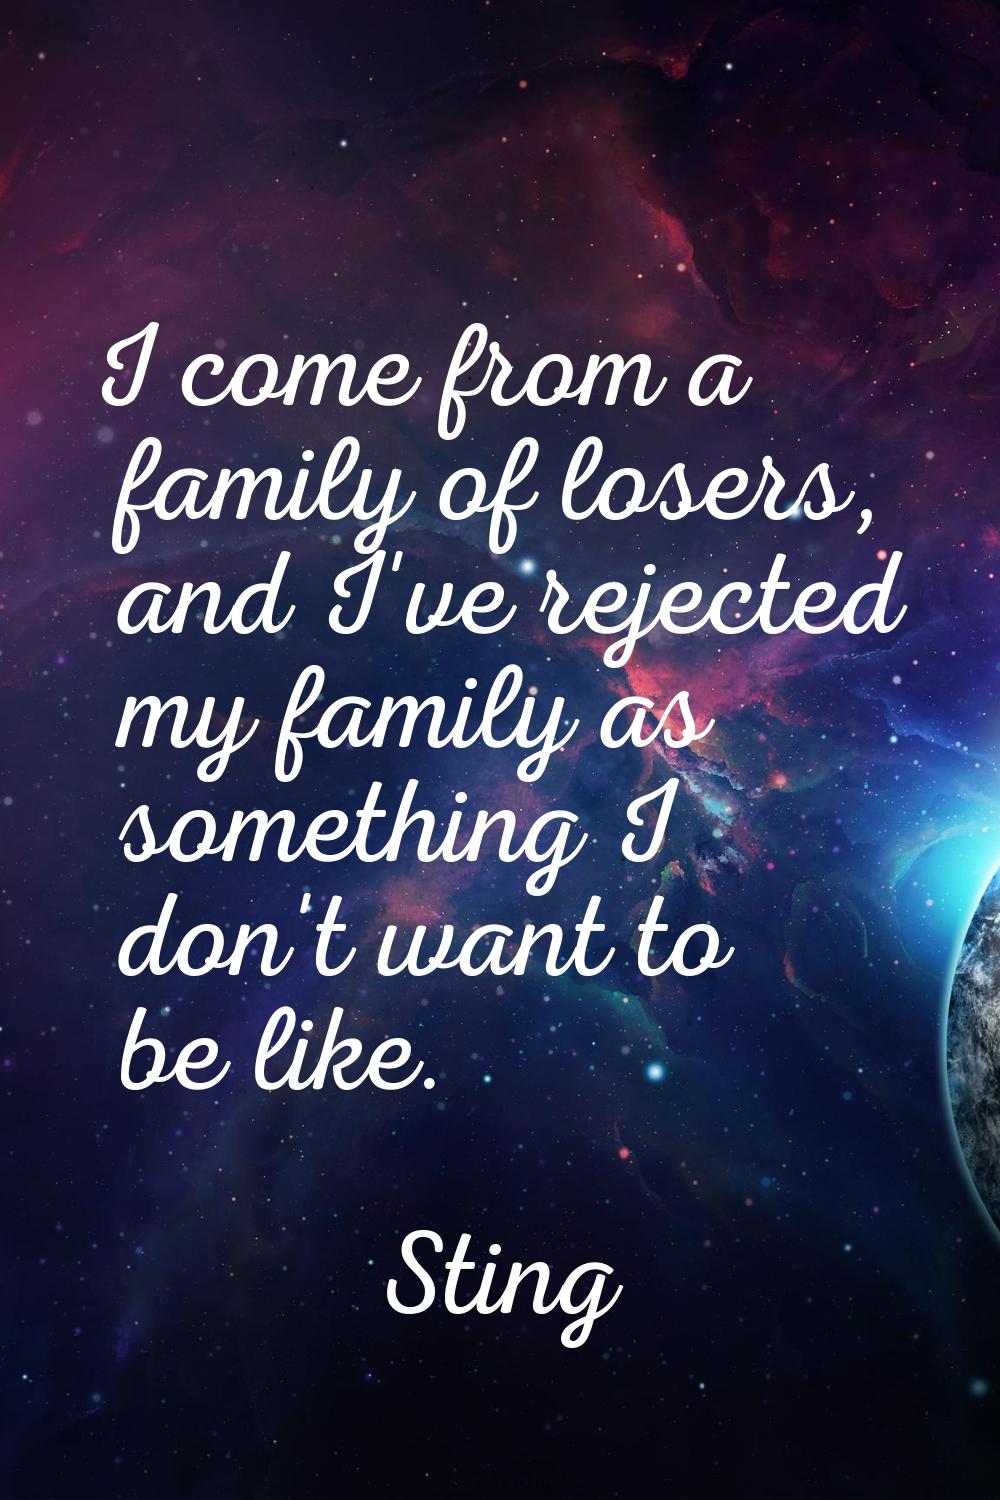 I come from a family of losers, and I've rejected my family as something I don't want to be like.